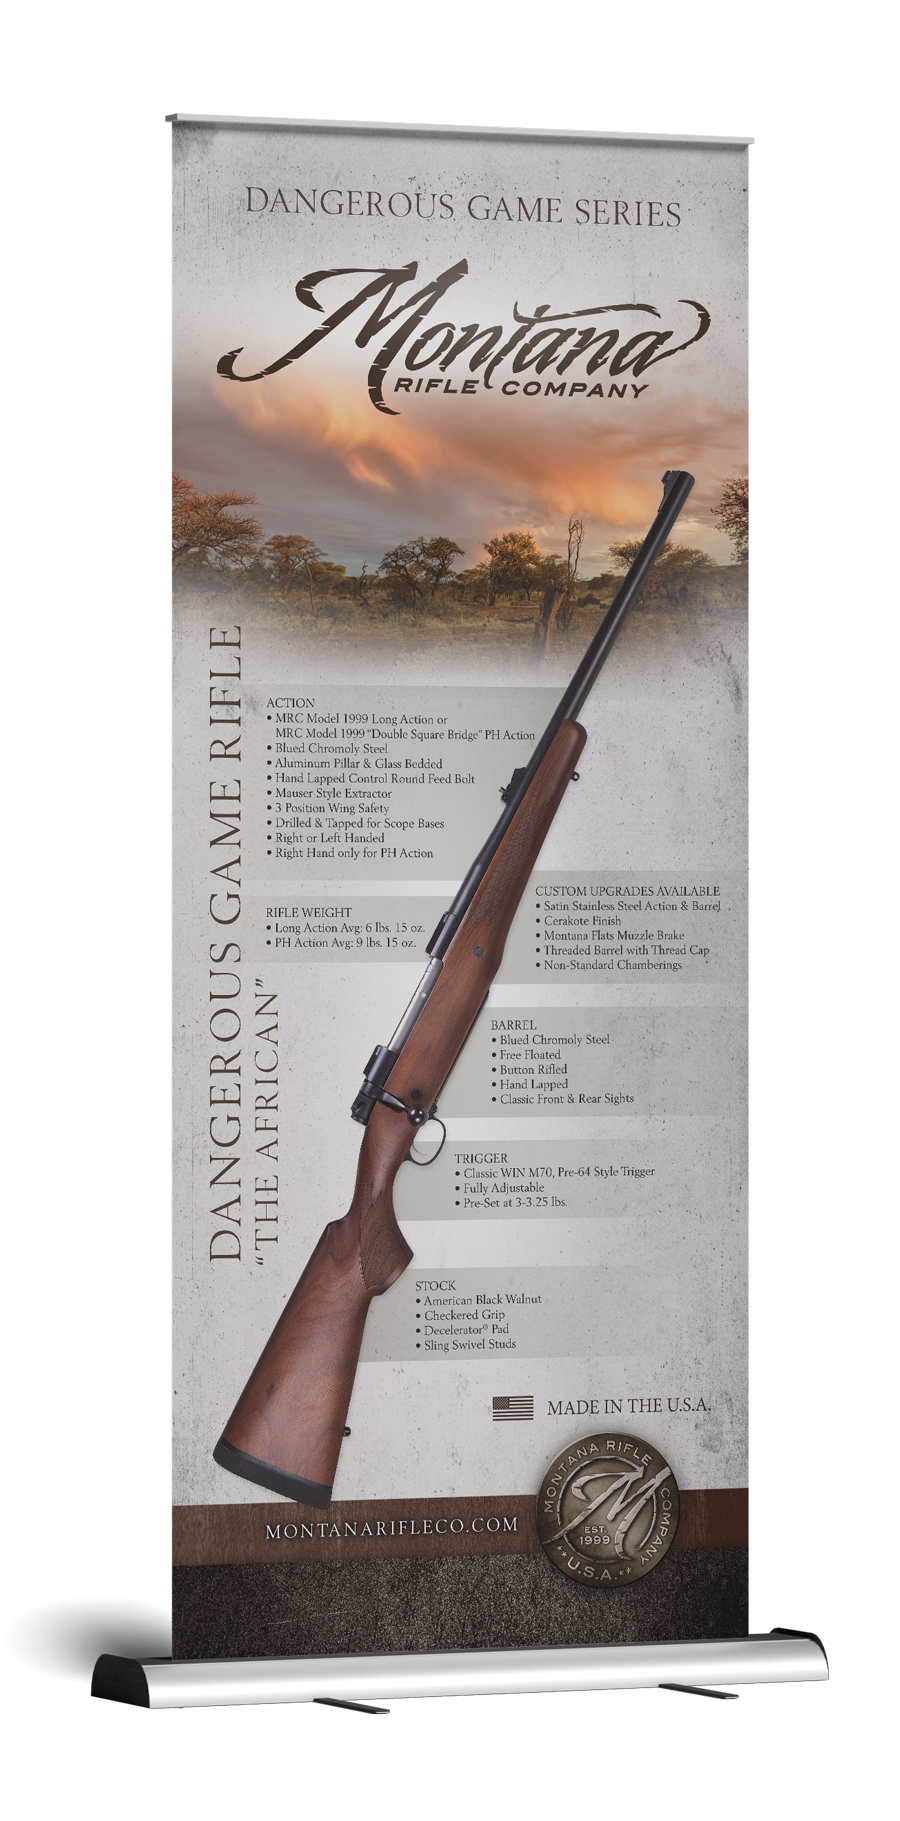 Montana Rifle Company - Dangerous Game Rifle African - Pop Up Banner Design & Print Production